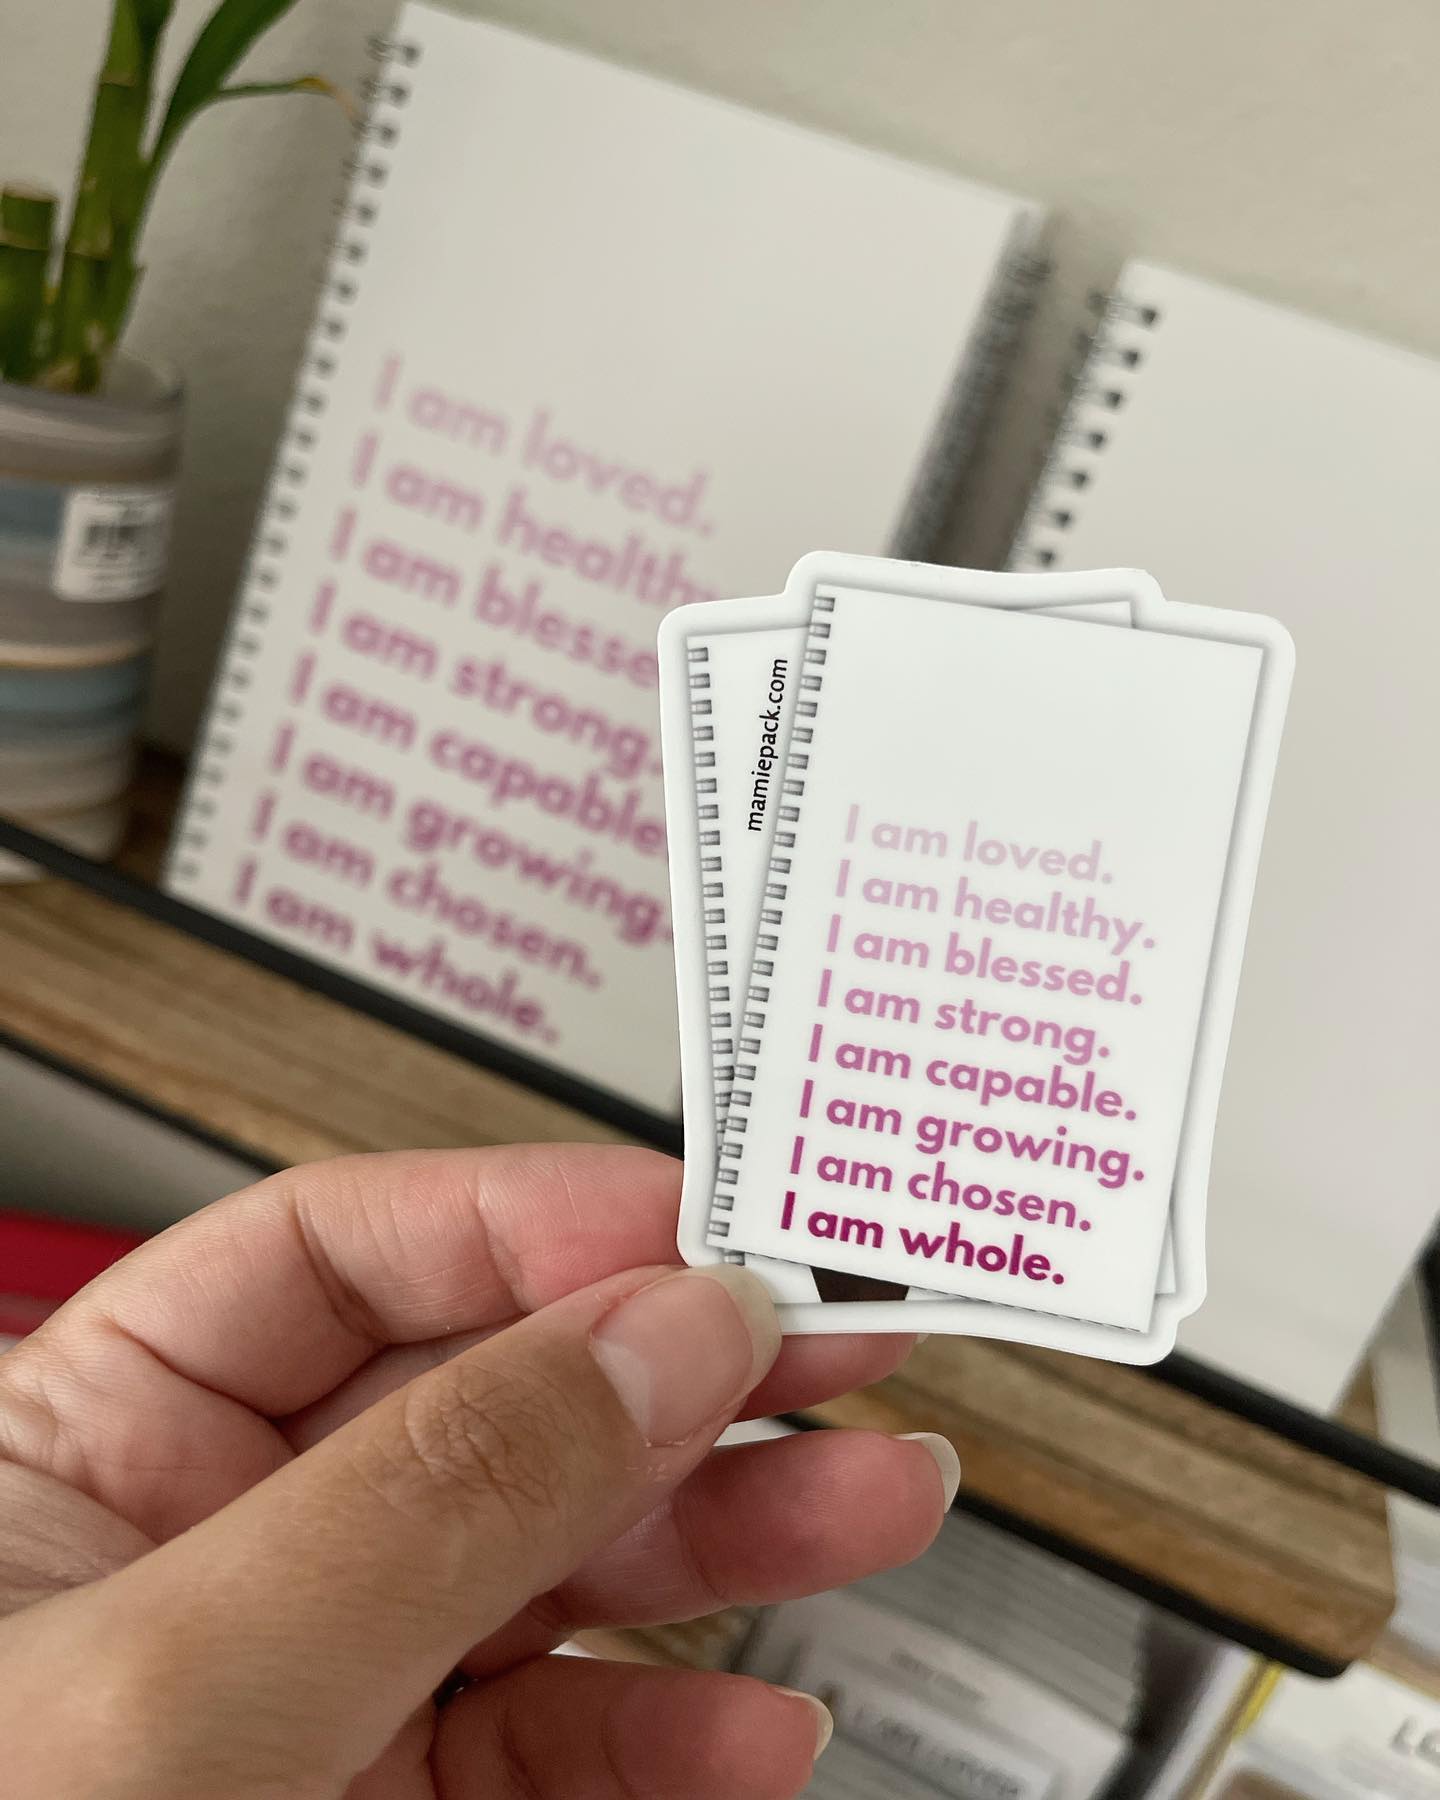 Journals + sticker= happiness.

We love the way our sticker of our “I am” positive affirmation journal turned out. This little cutie is one of our freebies this summer when you place an order. 

👉🏼Okay, let me know where would you put our sticker?
.
.
.
.
.
#mamielpackmedia #sticker #stickerfun #stationery #stationeryshop #stationerysupplies #stationerystore #cutestationery #prettystationery #stationerybusiness #iknowwhoiam #iamcapable #iamhealing #iamhealthy #journal #journalcommunity #journaling #journaljunkie #blackwomenjournal #blackwomenwrite #knowyourworth